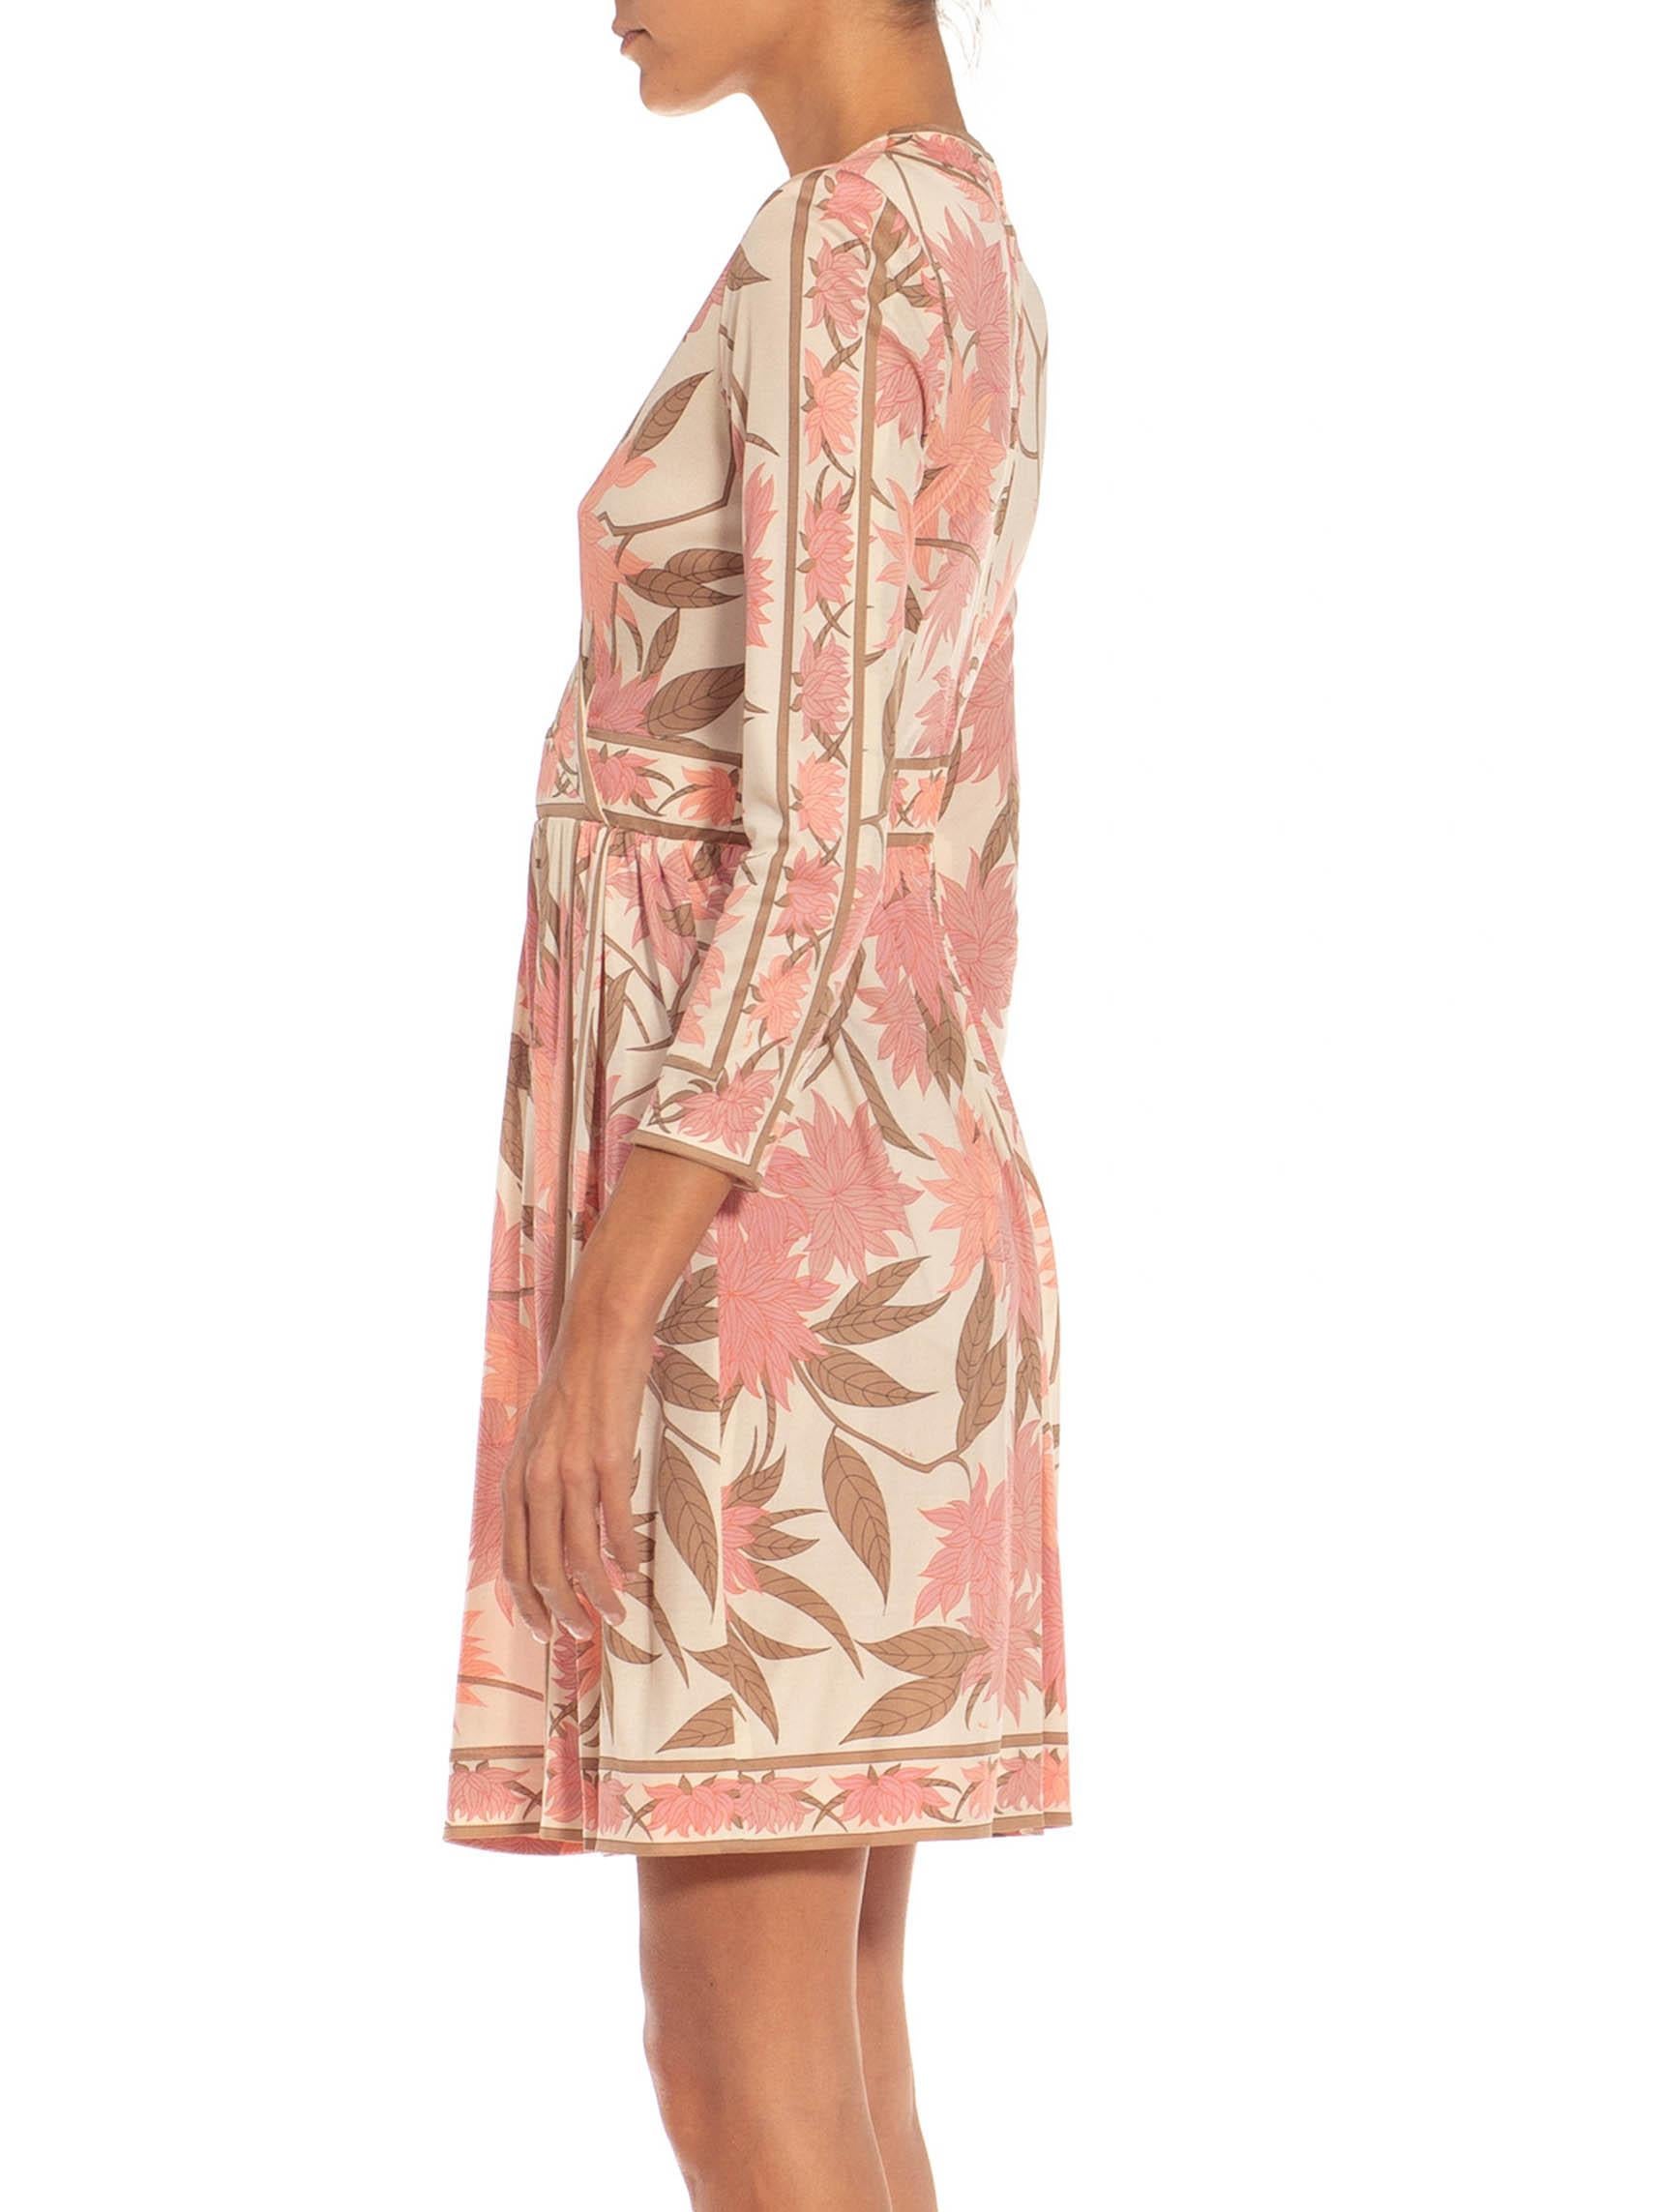 Beige 1970S EMILIO PUCCI Cream, Brown & Pink Floral Silk Rayon Blend Signed Dress For Sale